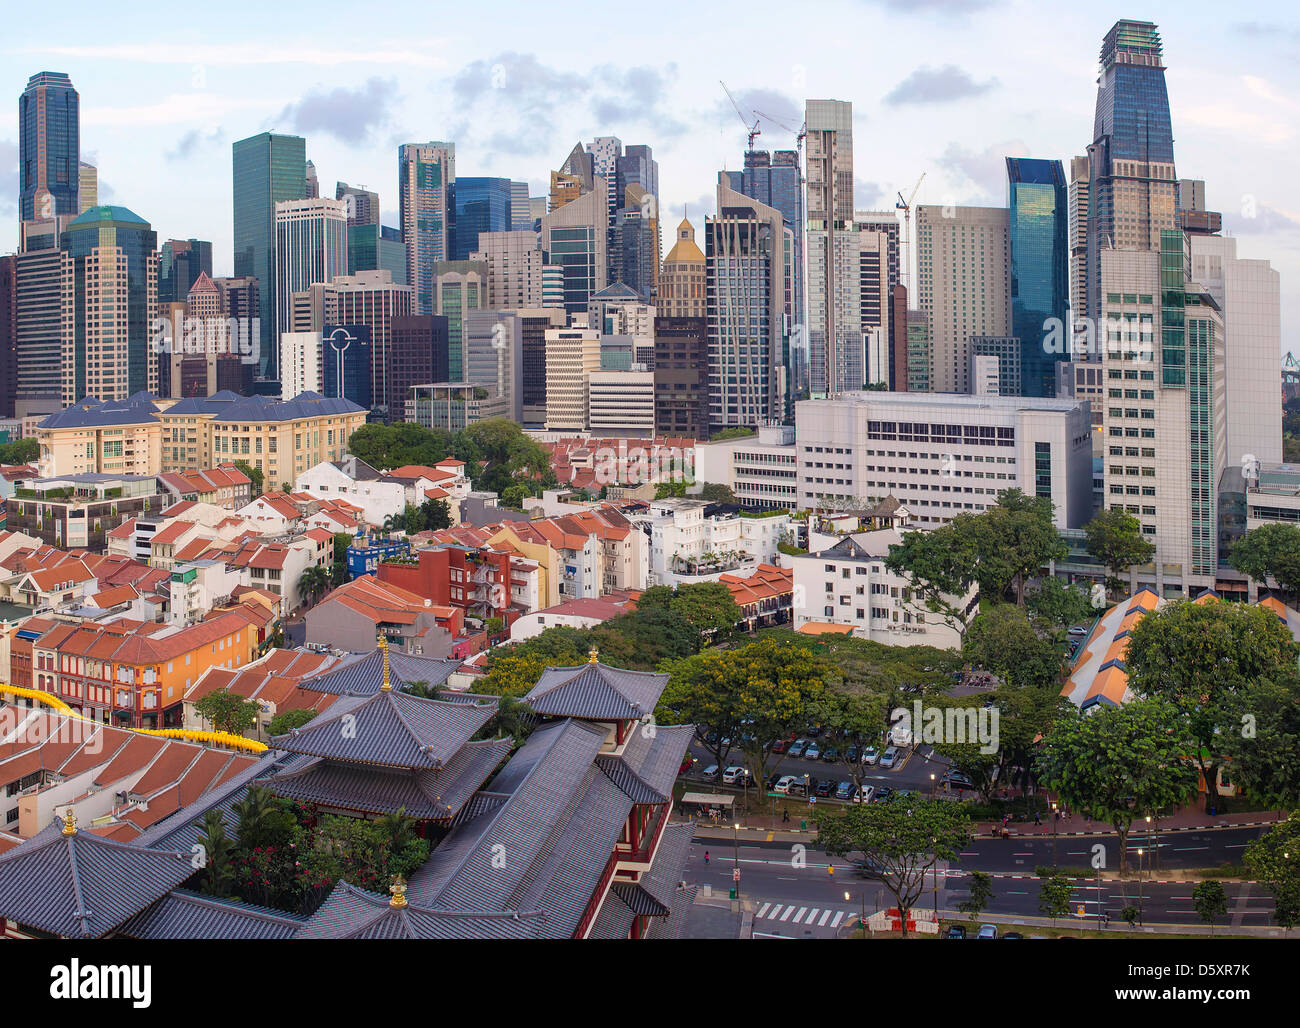 Singapore City Central Business District (CBD) Over Chinatown Area with Old Houses and Chinese Temple Stock Photo